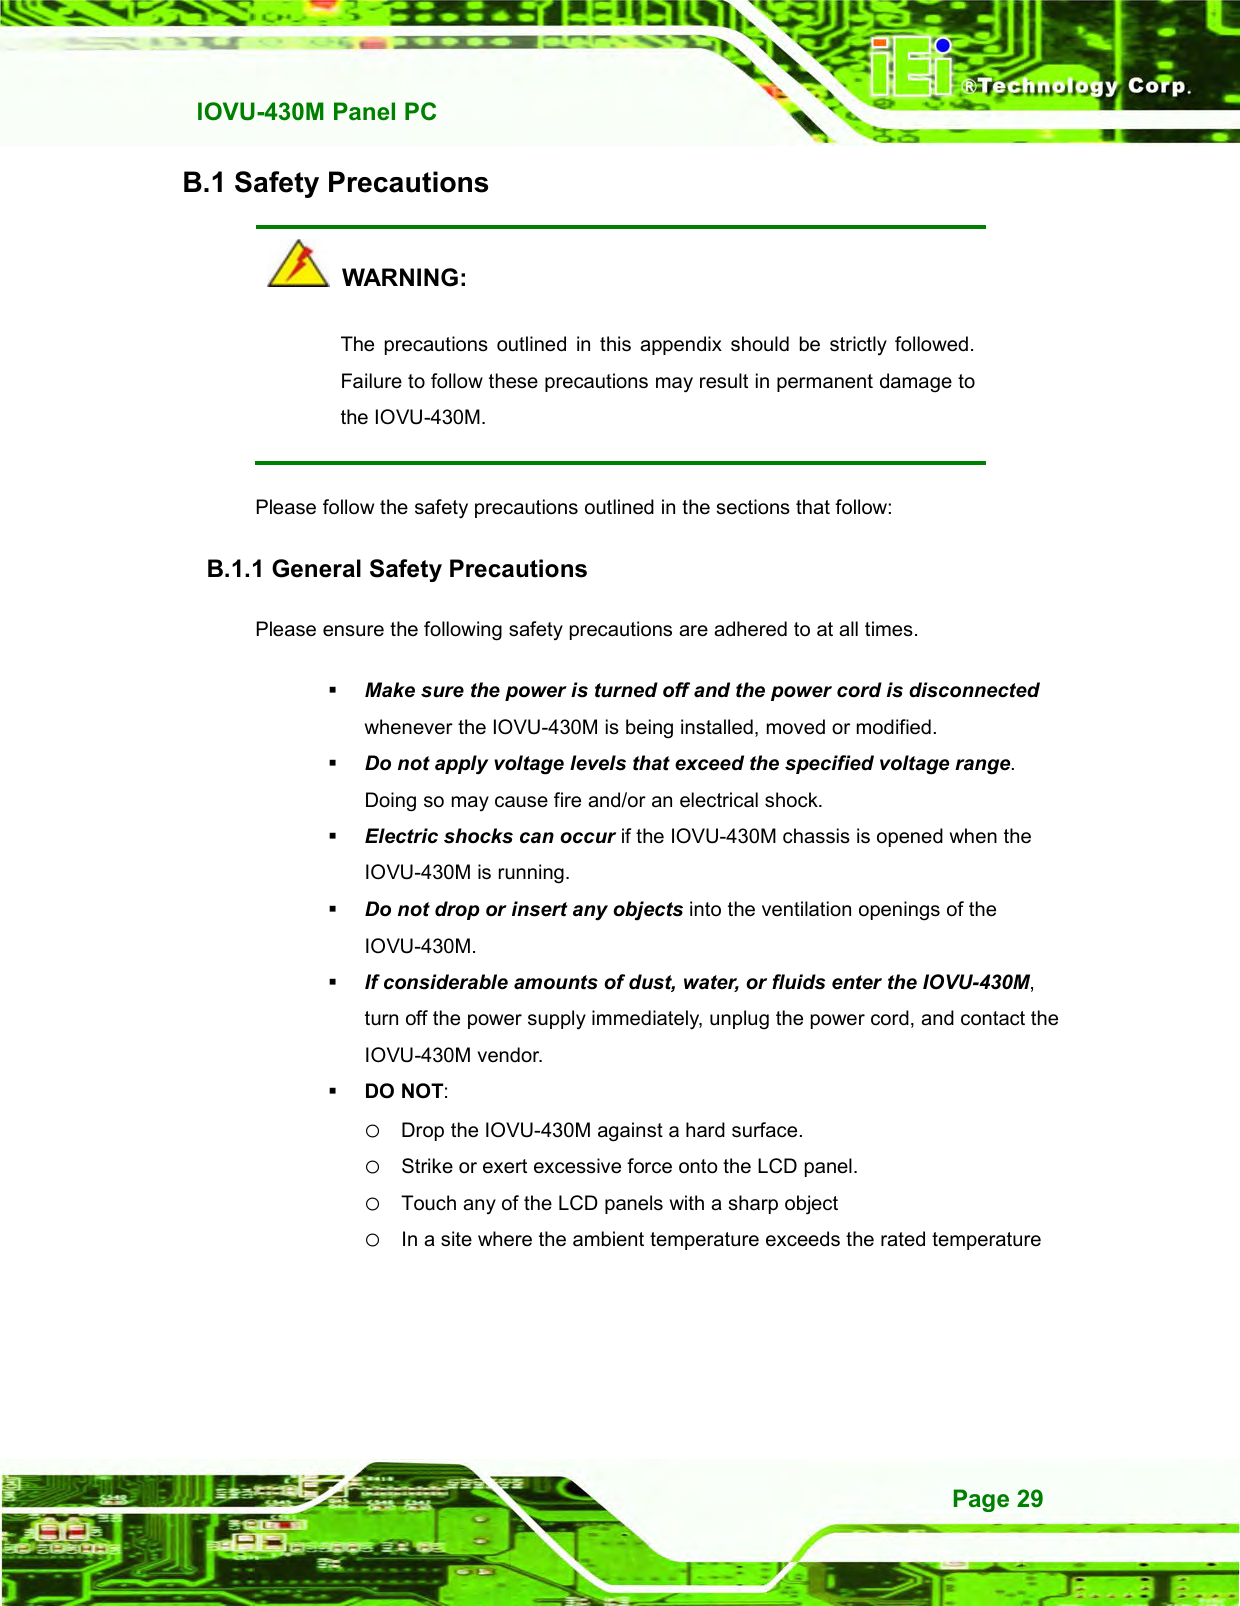   IOVU-430M Panel PC Page 29 B.1 Safety Precautions   WARNING: The  precautions  outlined  in  this  appendix  should  be  strictly  followed. Failure to follow these precautions may result in permanent damage to the IOVU-430M. Please follow the safety precautions outlined in the sections that follow: B.1.1 General Safety Precautions Please ensure the following safety precautions are adhered to at all times.  Make sure the power is turned off and the power cord is disconnected whenever the IOVU-430M is being installed, moved or modified.    Do not apply voltage levels that exceed the specified voltage range. Doing so may cause fire and/or an electrical shock.  Electric shocks can occur if the IOVU-430M chassis is opened when the IOVU-430M is running.    Do not drop or insert any objects into the ventilation openings of the IOVU-430M.  If considerable amounts of dust, water, or fluids enter the IOVU-430M, turn off the power supply immediately, unplug the power cord, and contact the IOVU-430M vendor.    DO NOT:   o Drop the IOVU-430M against a hard surface. o Strike or exert excessive force onto the LCD panel. o Touch any of the LCD panels with a sharp object o In a site where the ambient temperature exceeds the rated temperature 